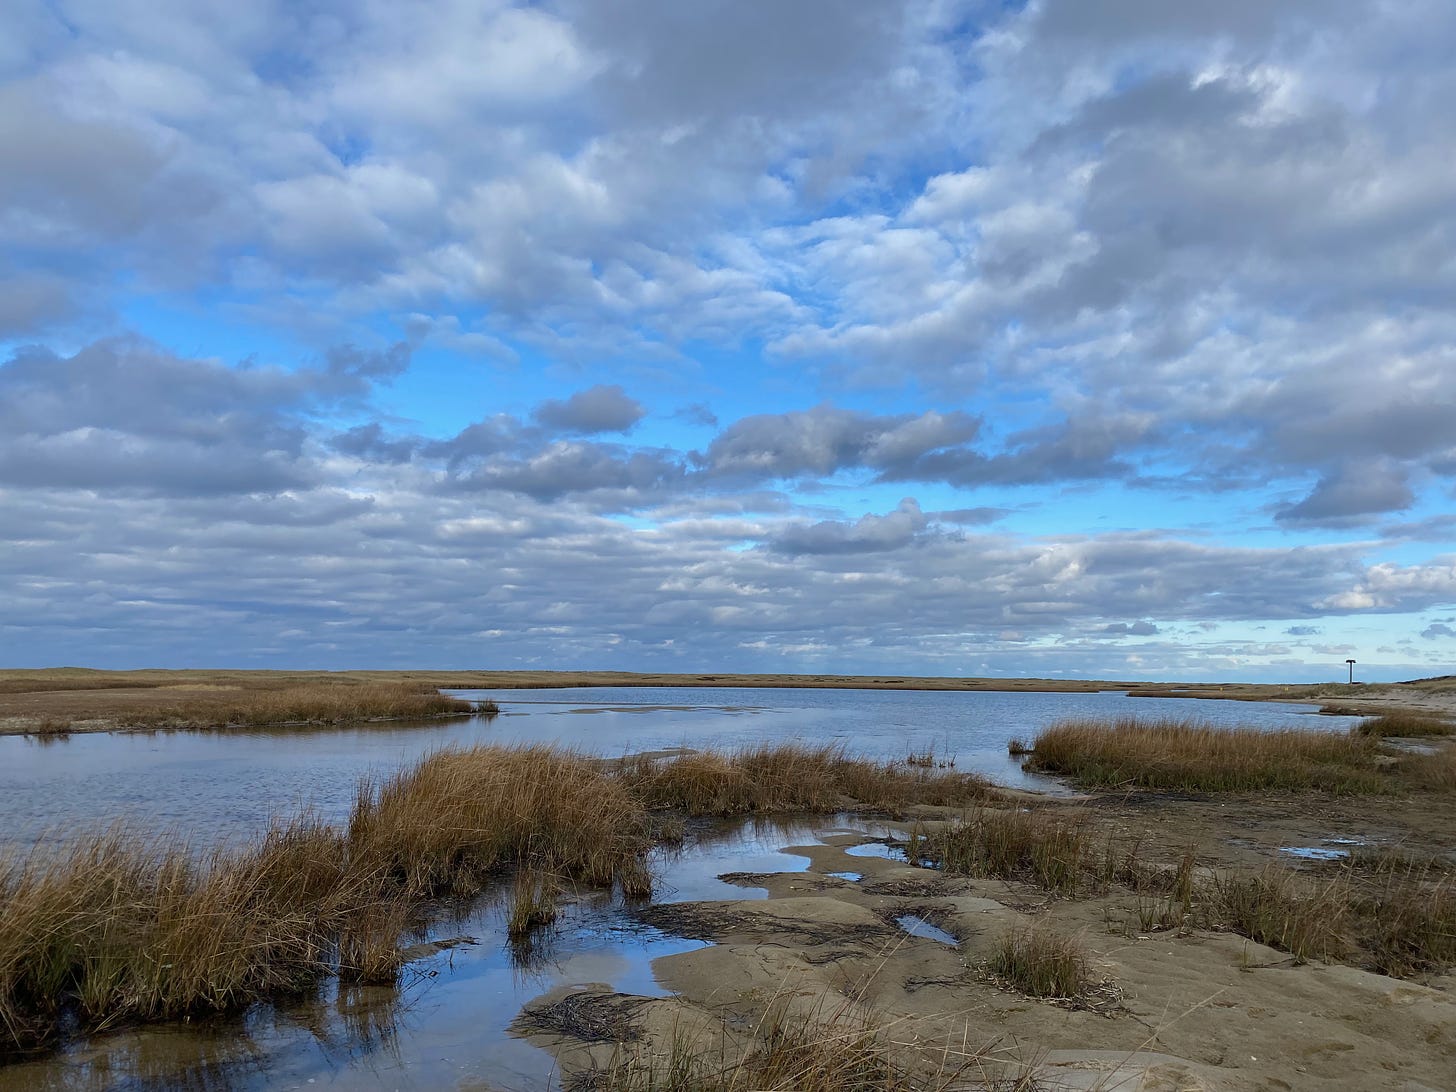 A salt marsh pond surrounded by tufts of beach grass and sand dunes, under a wide sky full of silver and purple clouds.